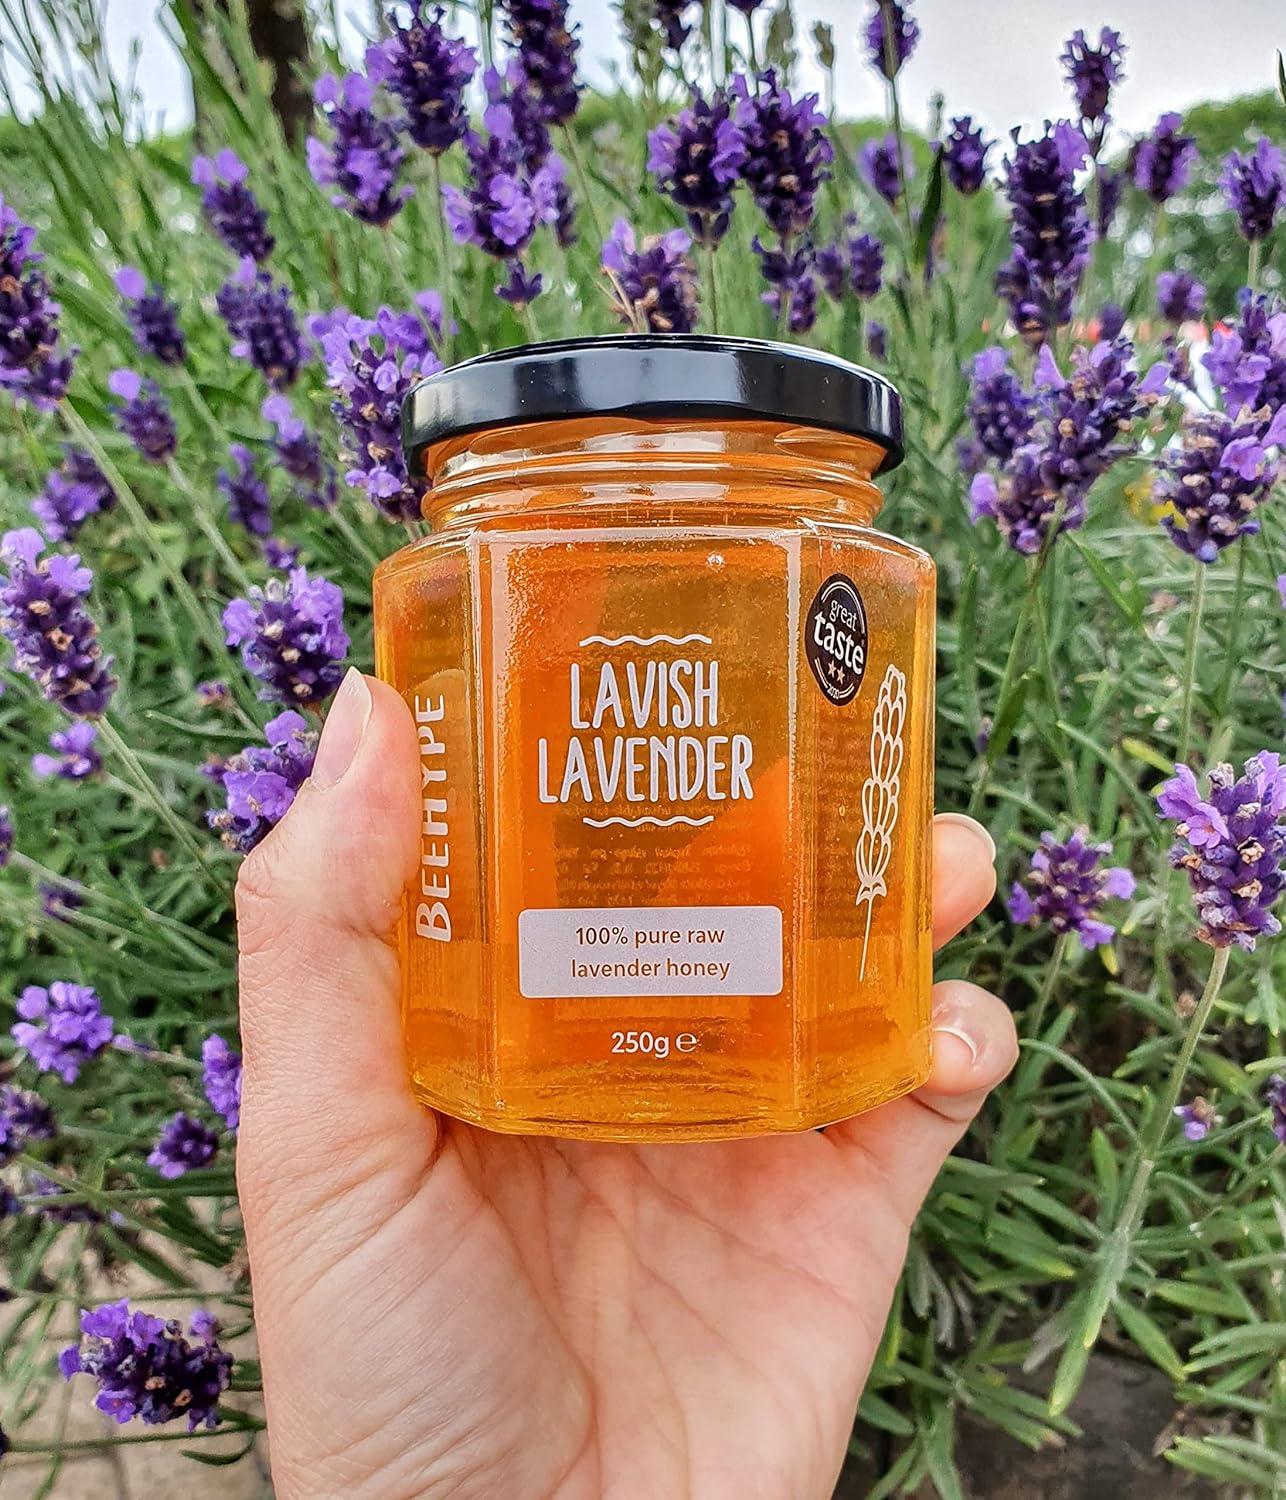 BeeHype Lavish Lavender - 100% Pure Raw Honey with Natural Enzymes Vitamins  Minerals and Antioxidants - 250g Lavish Lavender 250g